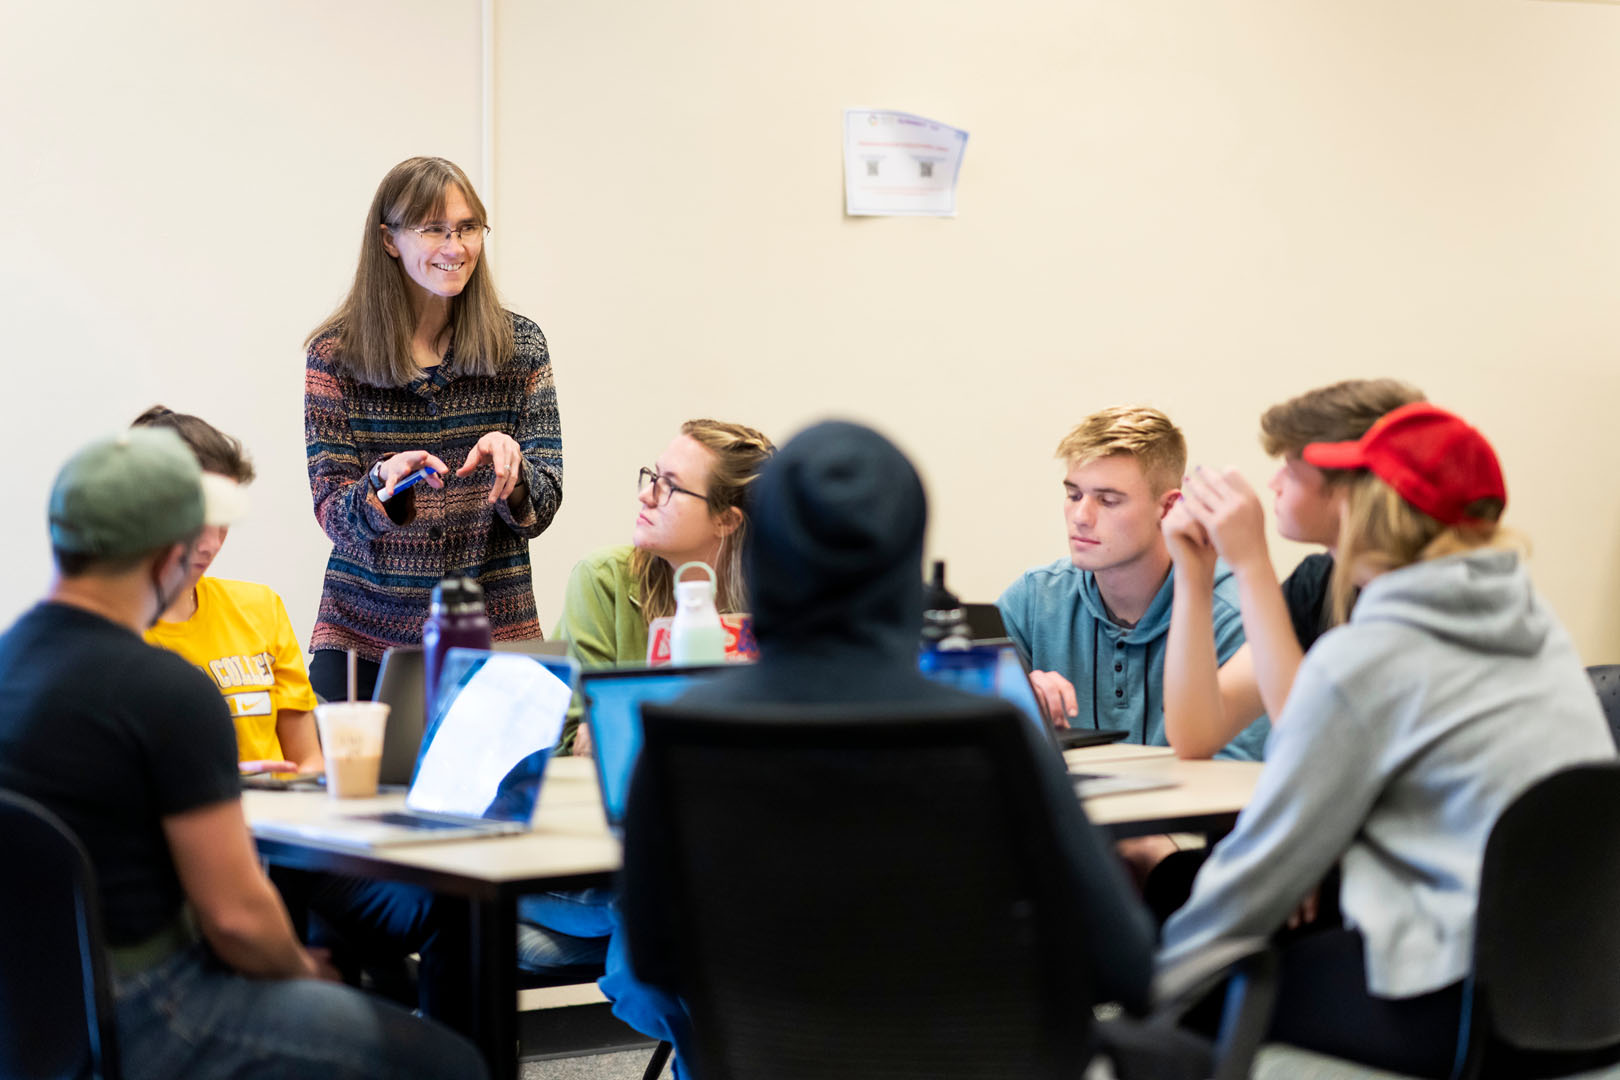 Students in Marion Hourdequin's Block 6 Contesting Climate Justice class are pictured participating in a class debate on climate policy on March 15, 2023. Photo by Lonnie Timmons III / Colorado College.